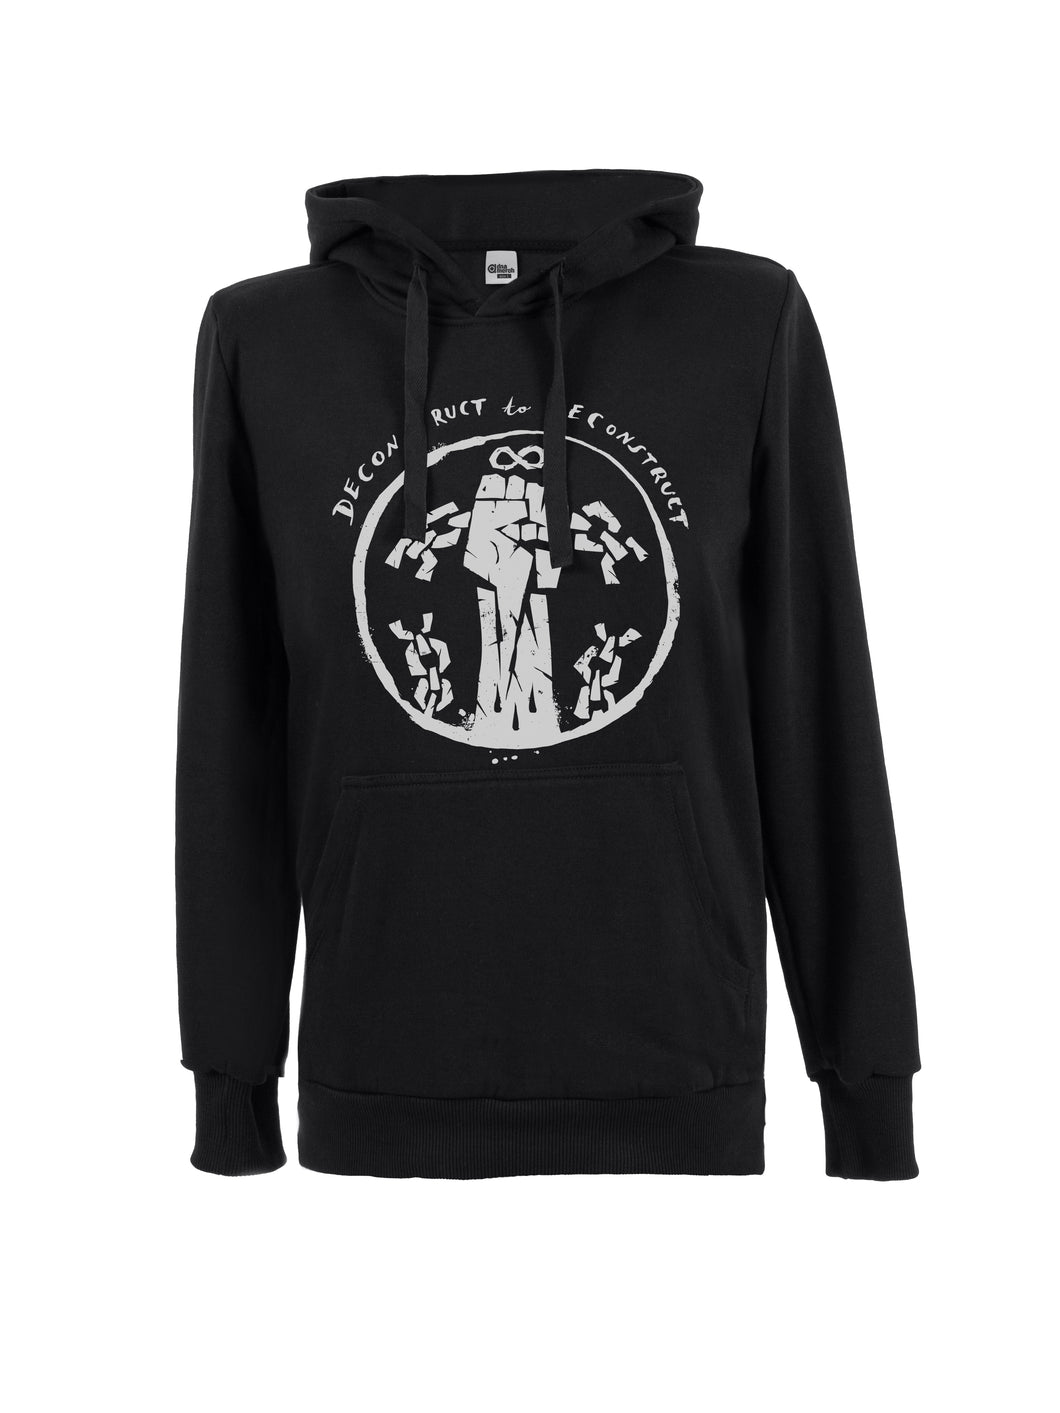 T-Shirt of the Month: Deconstruct & Reconstruct – Hoodie